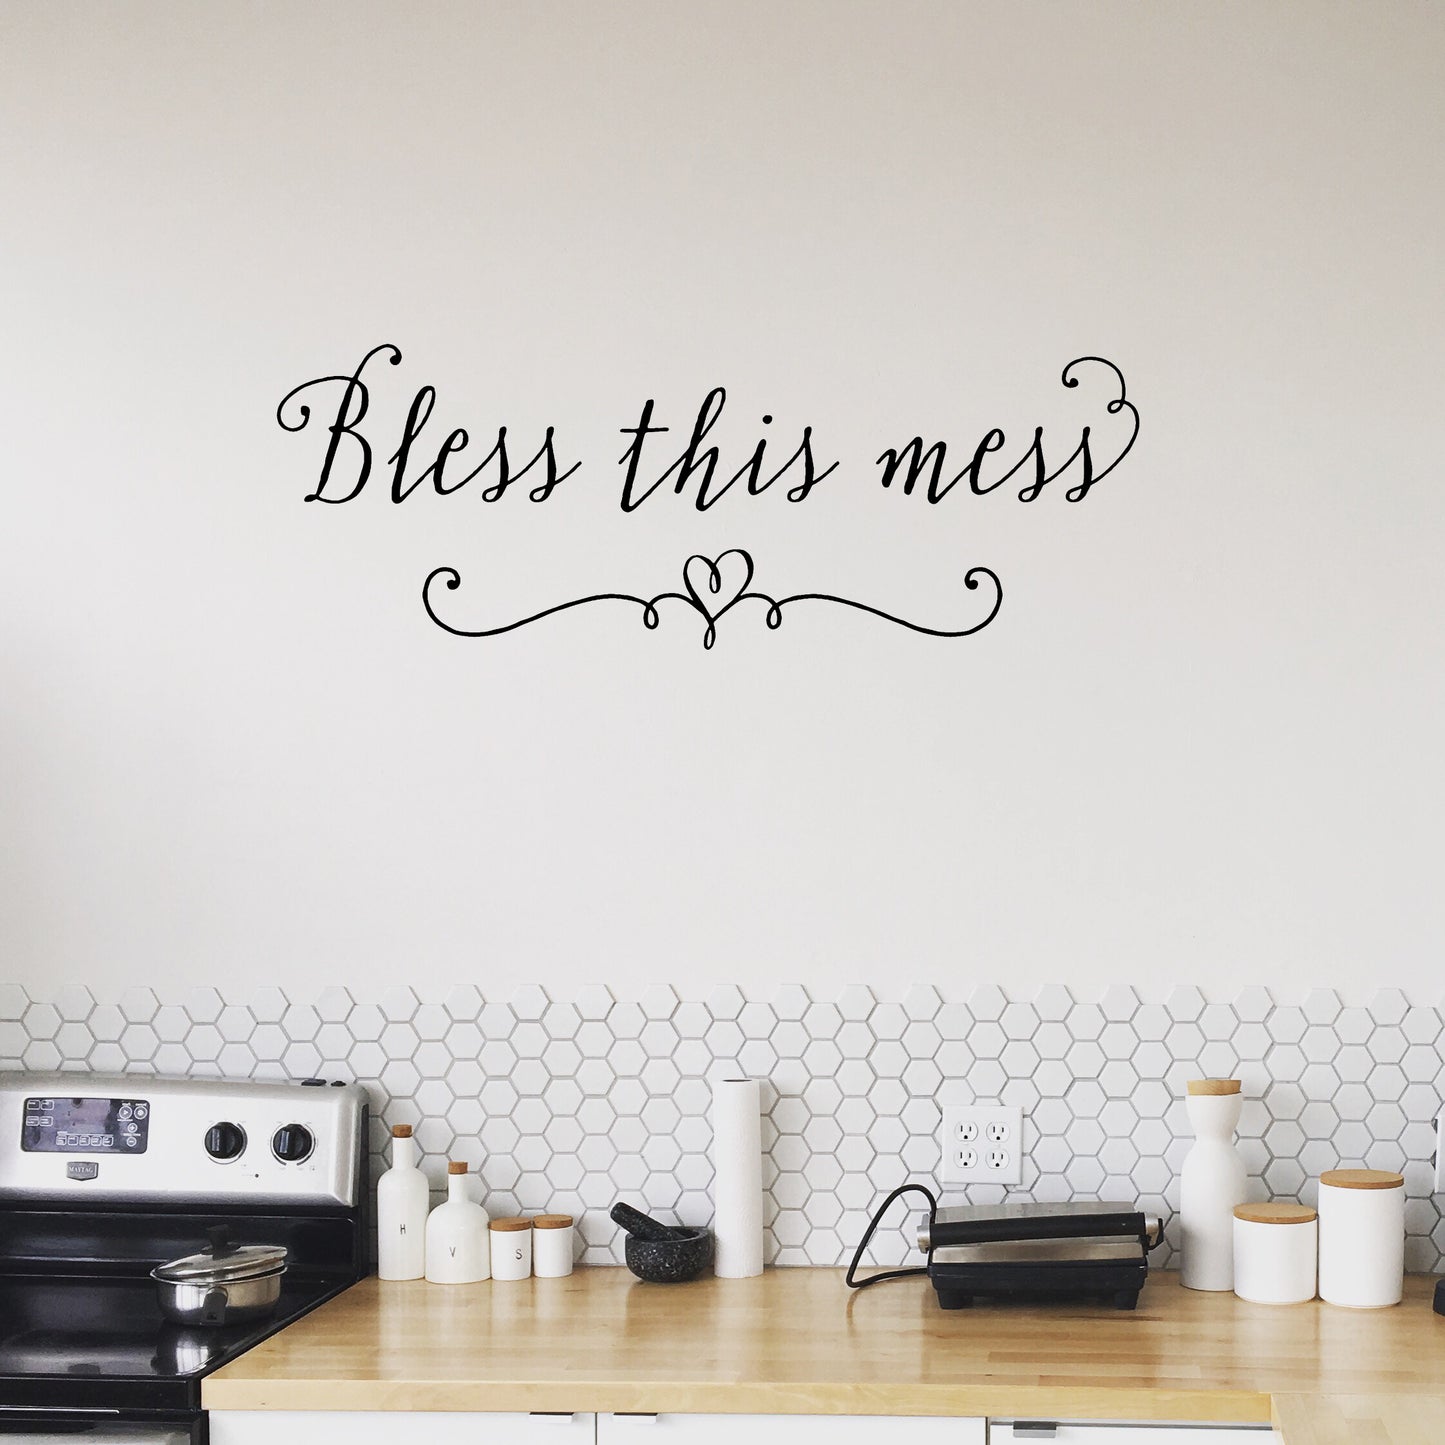 Bless This Mess Wall Decal - Home Decal - Playroom Decals - Home Decals - Home Decor - Wall Decal - Christian Decals